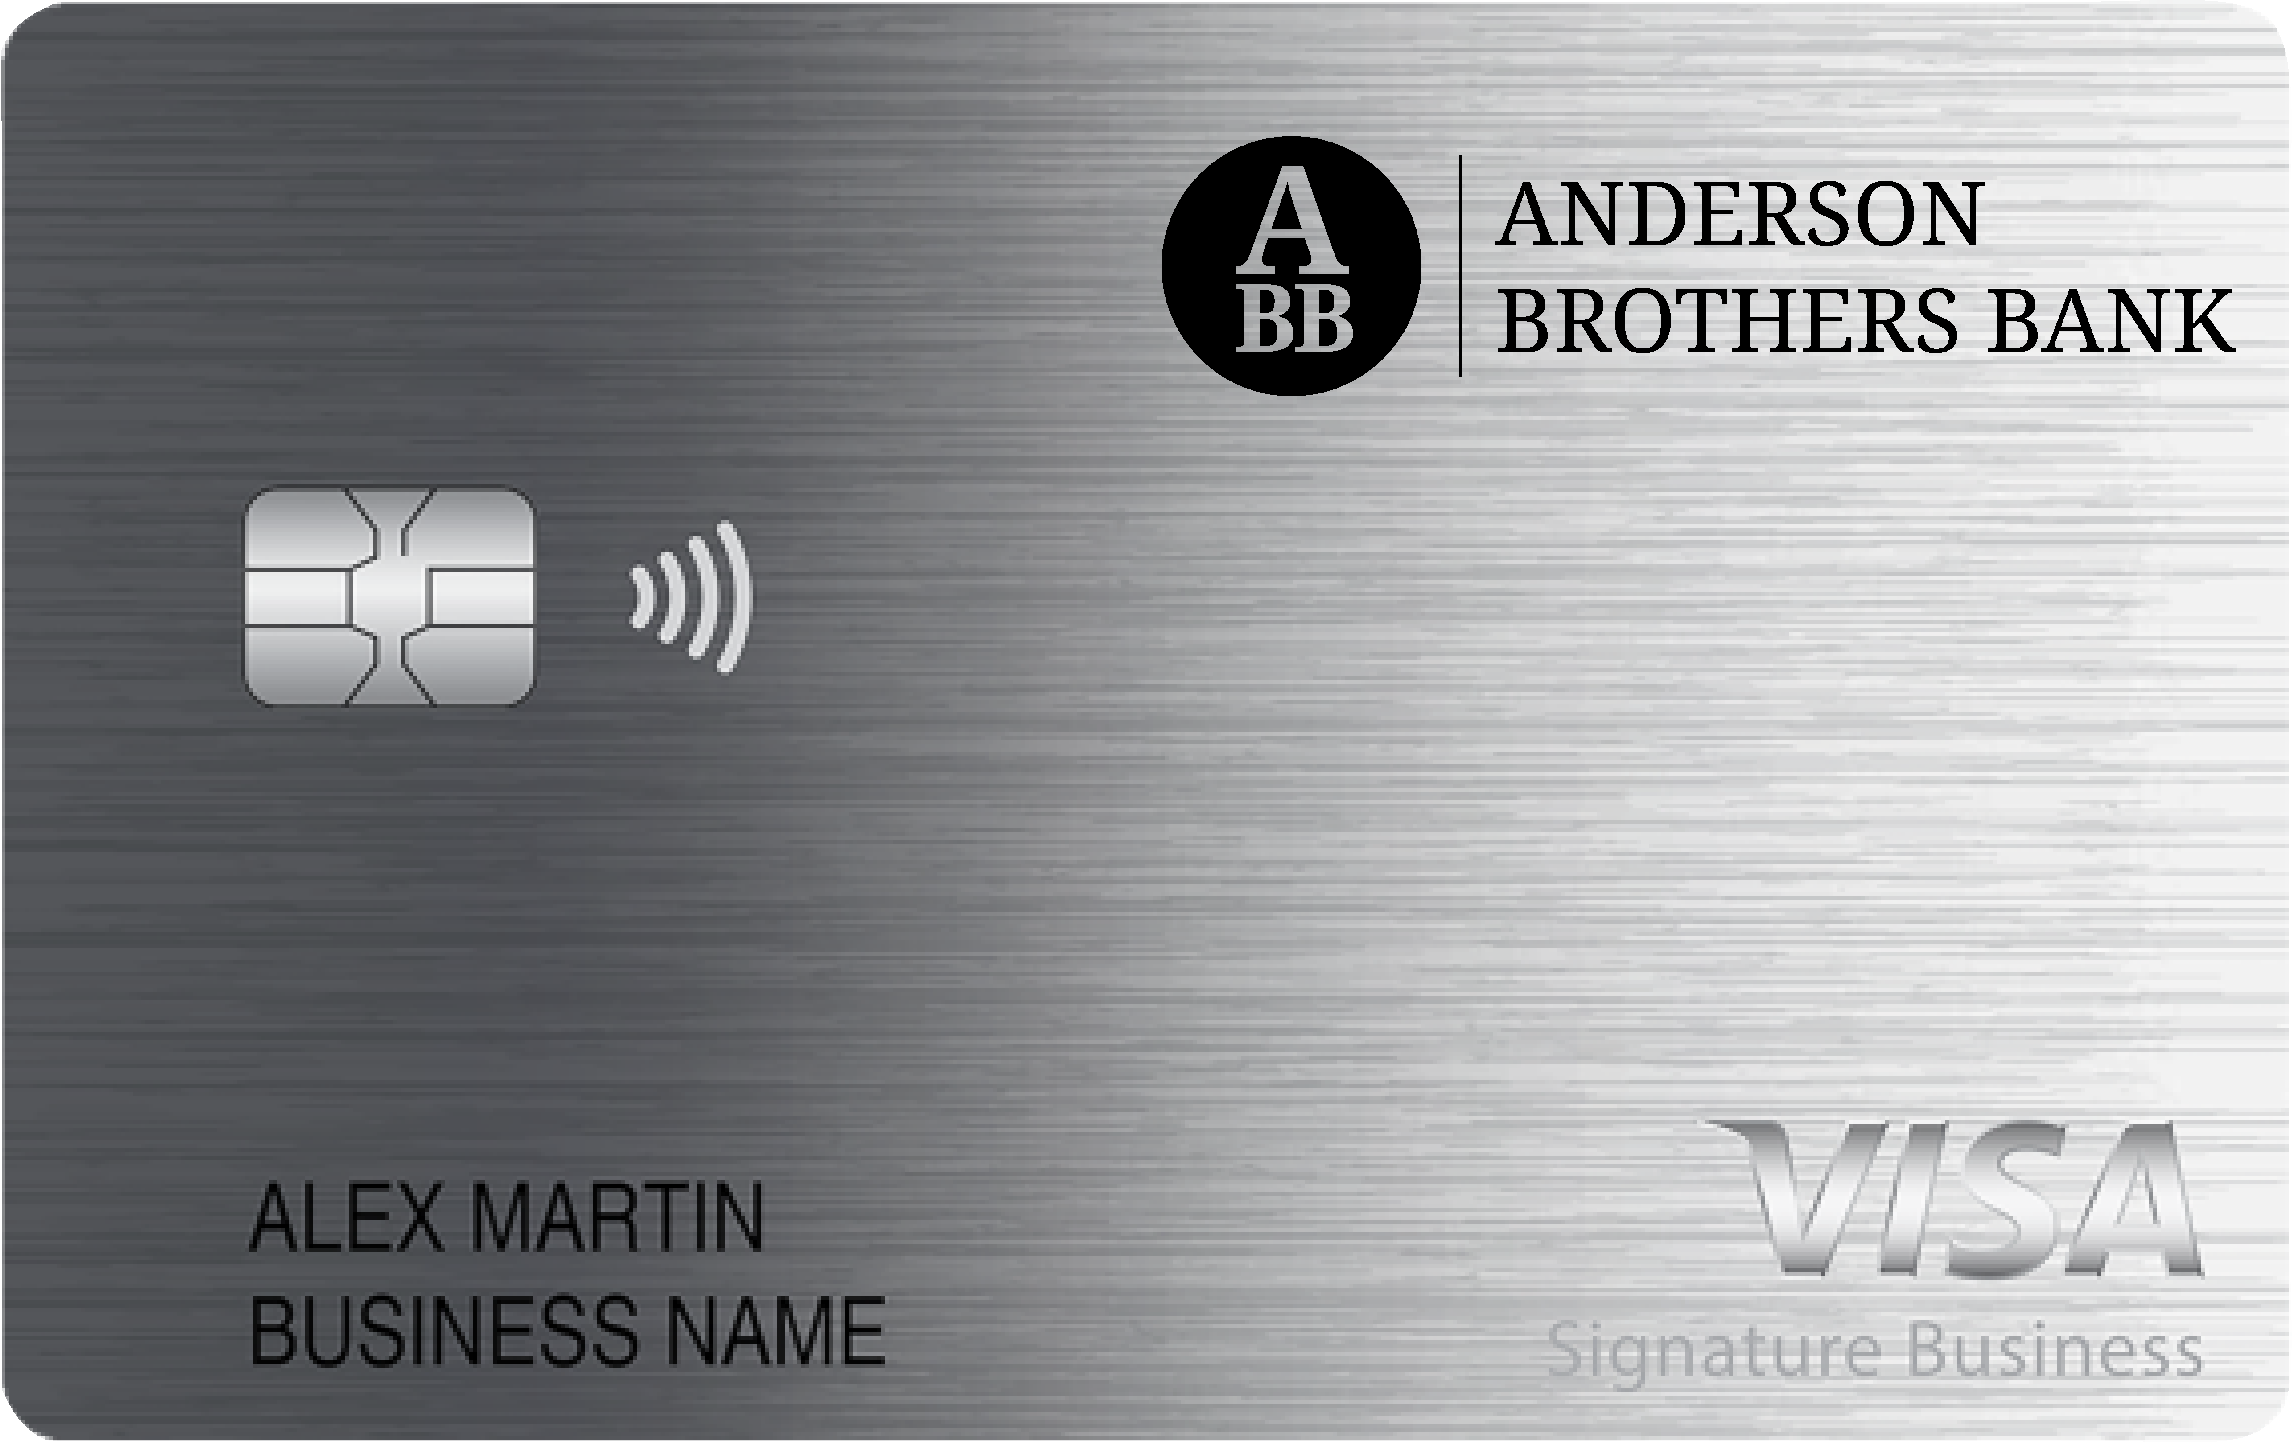 Anderson Brothers Bank Smart Business Rewards Card